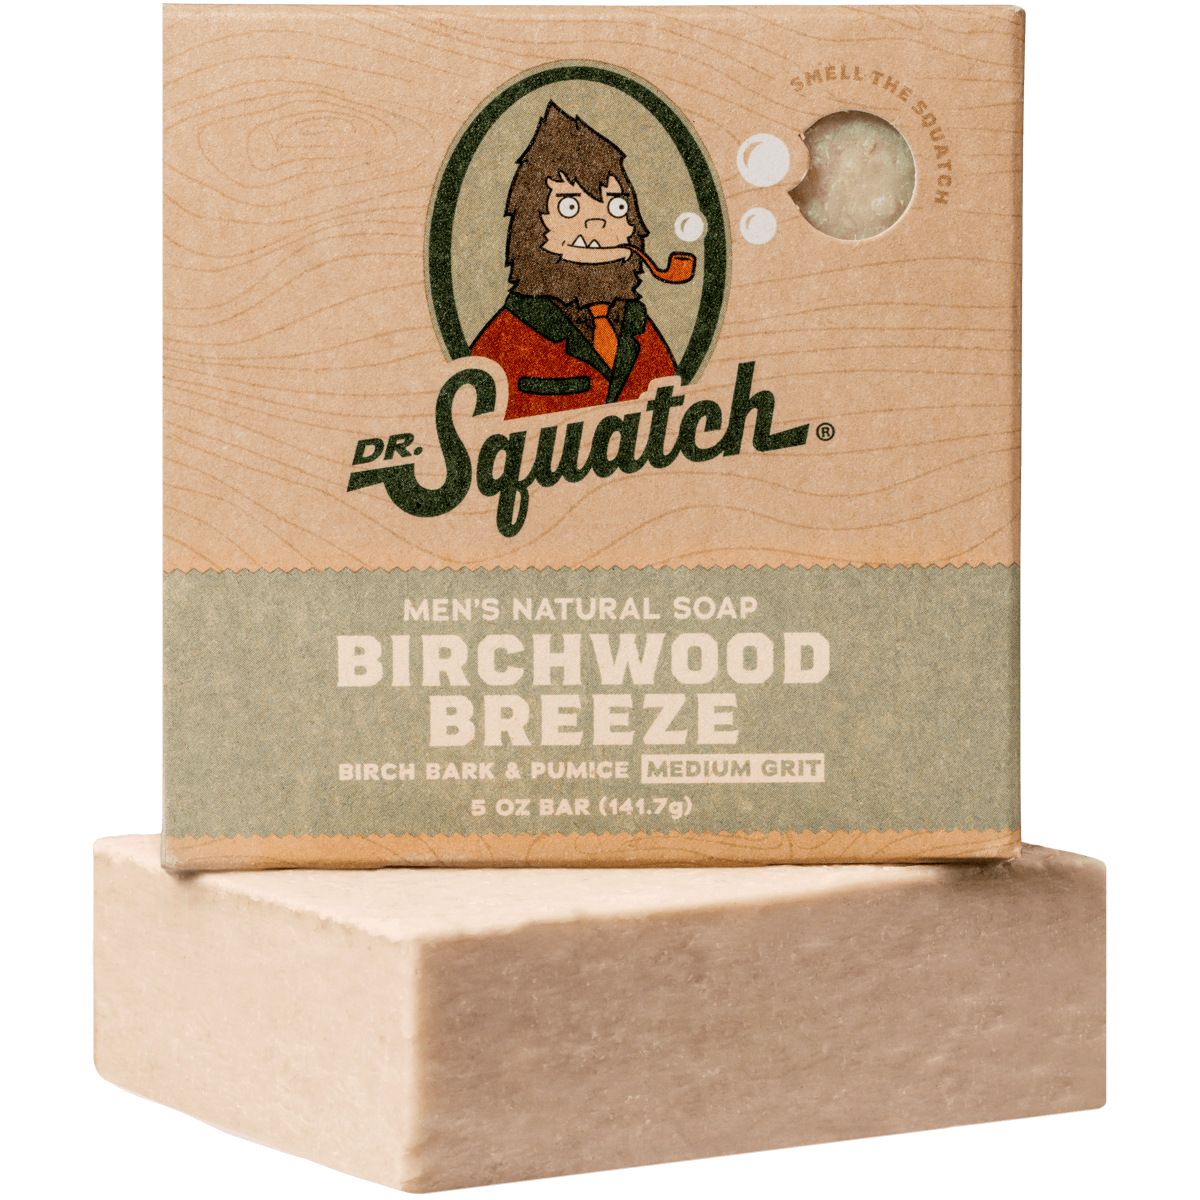 Dr. Squatch Men's Natural Soap: Product Review - Worth it or Junk